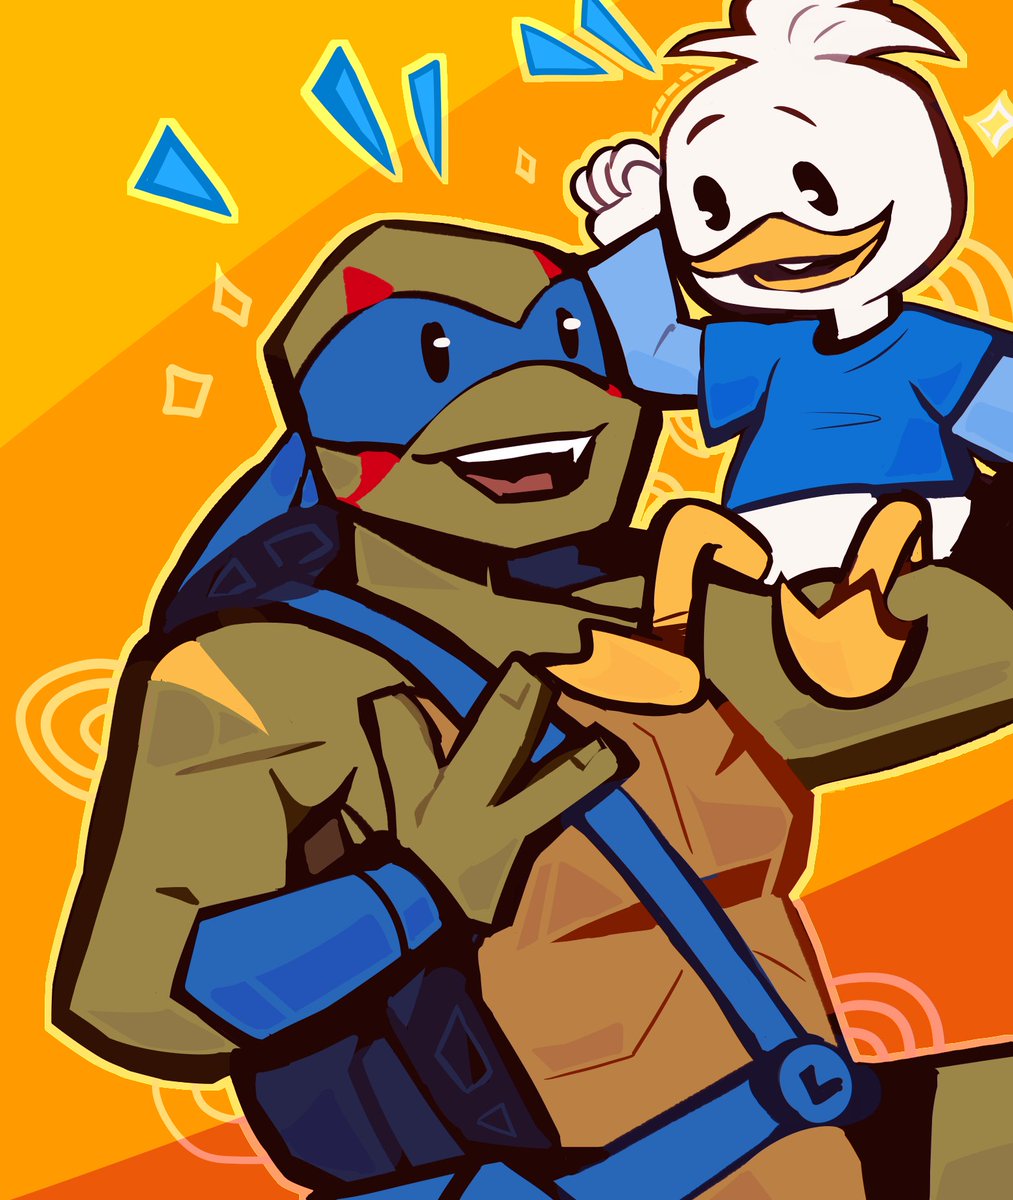 「blue boys :D #ducktales #rottmnt 」|zaeed 🇦🇷のイラスト